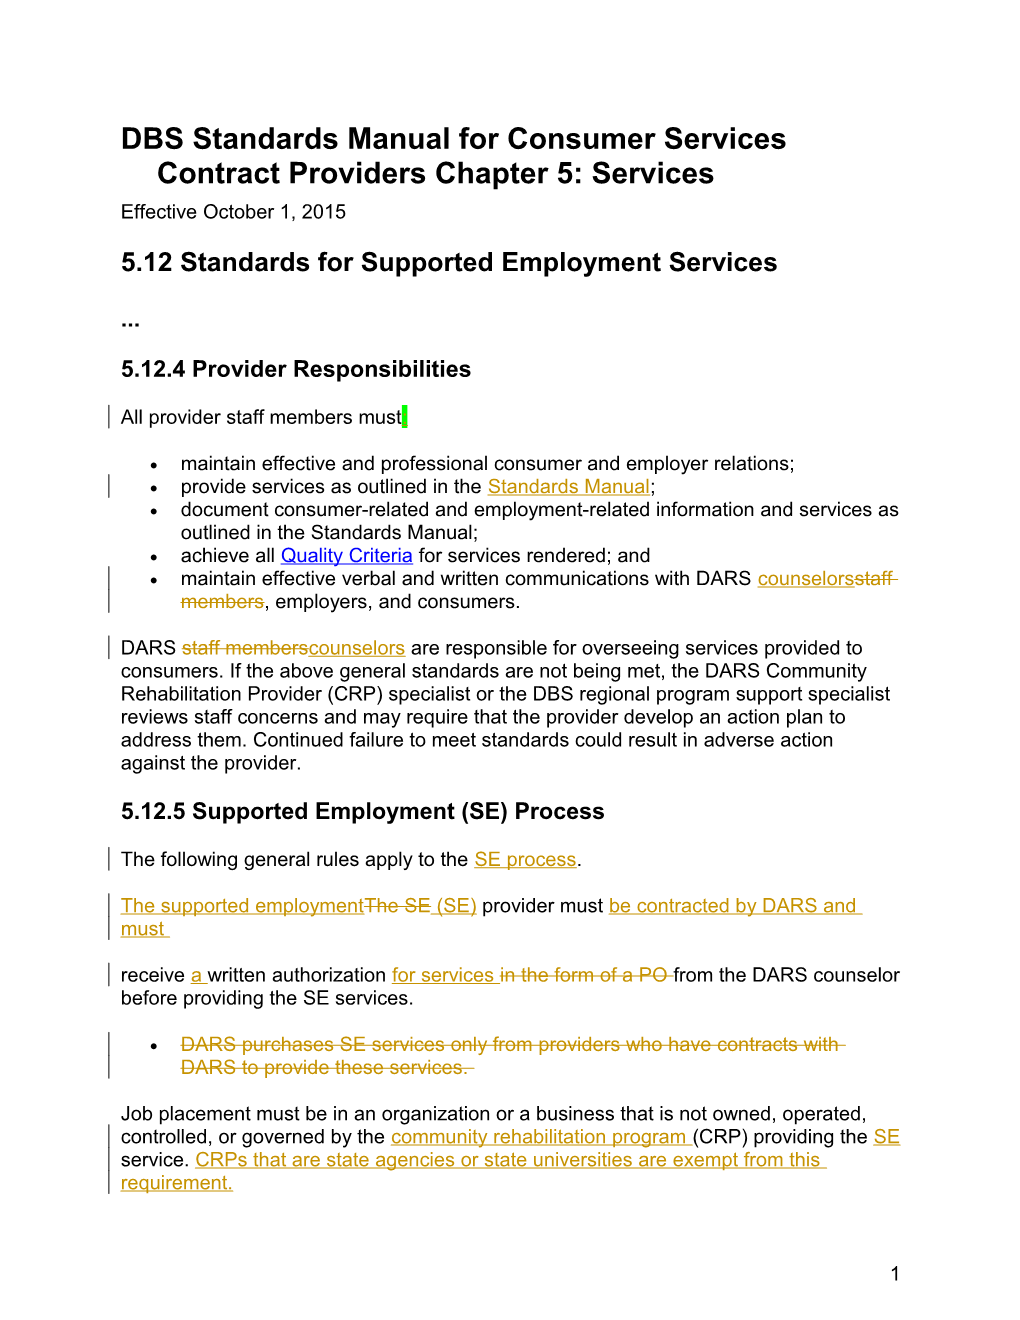 DBS Standards Manual for Consumer Services Contract Providers Chapter 5 Revisions, October 2015